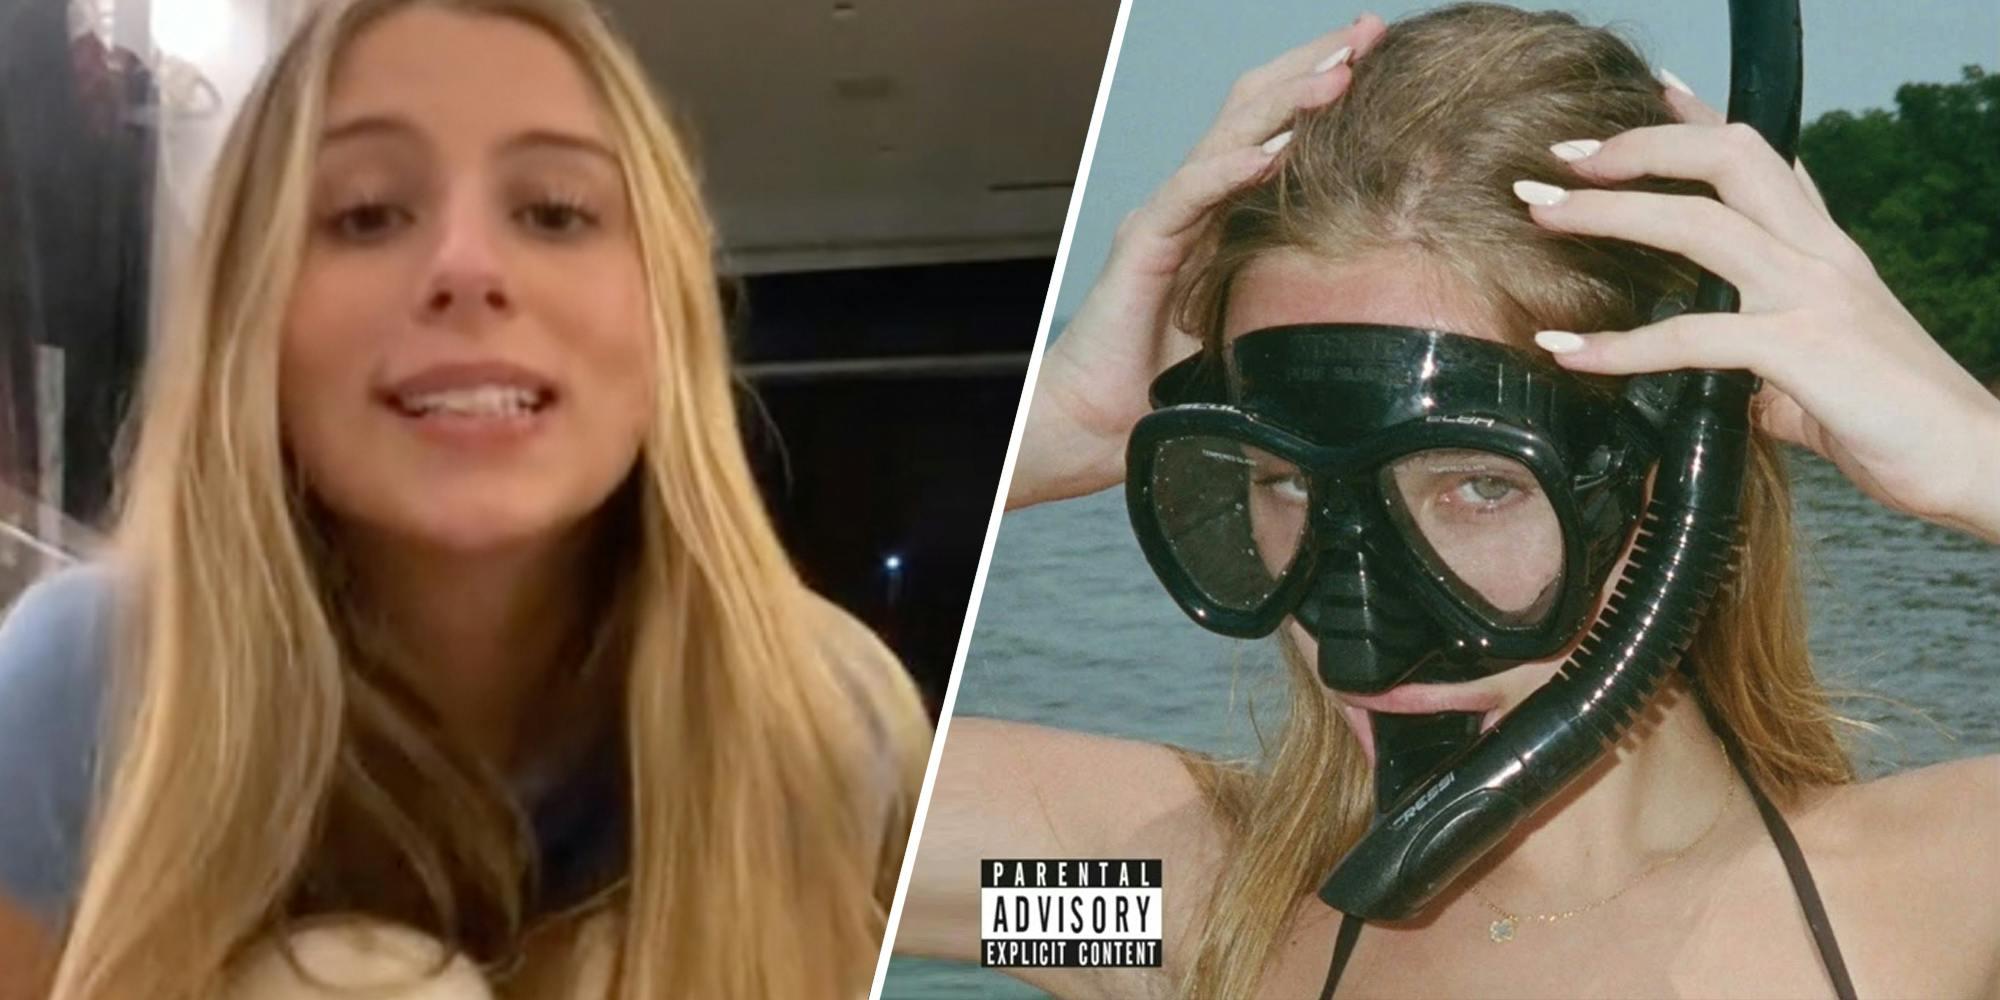 Sofia Coppola’s daughter Romy Mars soft-launches music career a year after her infamous ‘pasta’ TikTok